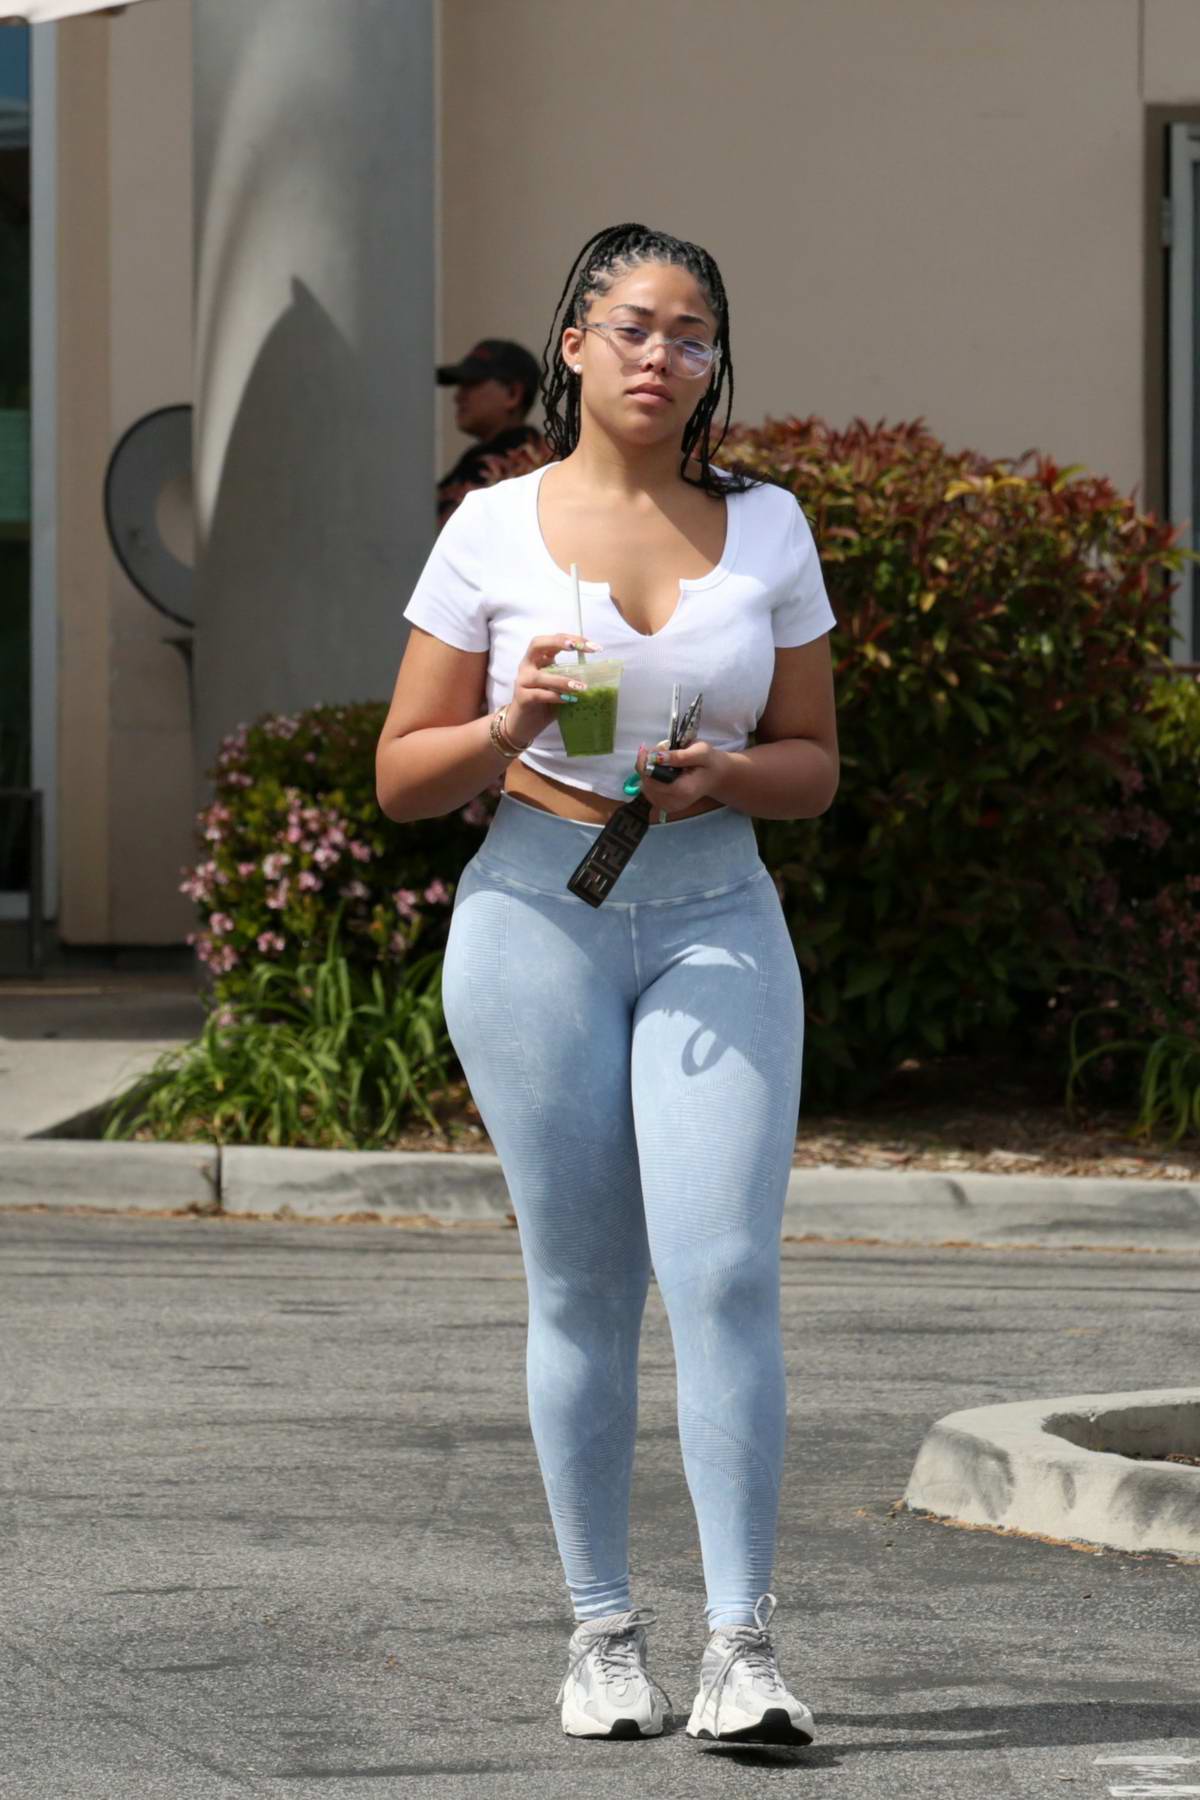 https://www.celebsfirst.com/wp-content/uploads/2019/04/jordyn-woods-sports-a-white-crop-top-and-pastel-blue-leggings-as-she-stops-by-erewhon-market-in-calabasas-los-angeles-090419_5.jpg